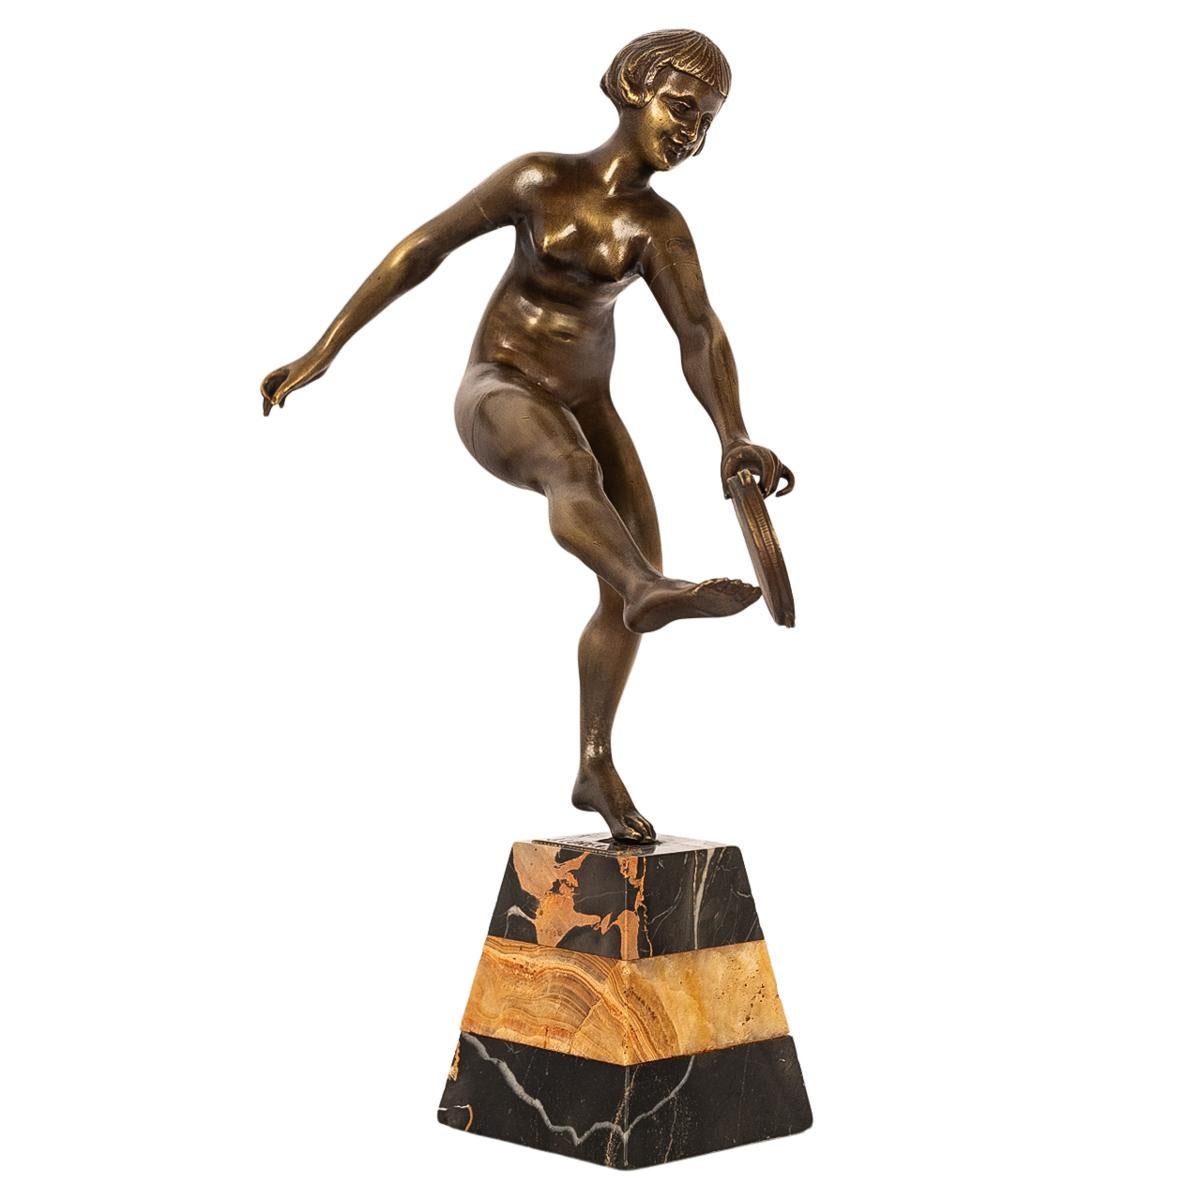 A very elegant antique Art Deco bronze sculpture, statue by Josef Lorenzl, Austria, 1925.
This beautiful bronze sculpture portrays a beautiful young woman, she is modeled as a nude tambourine dancer, holding a tambourine with her left hand and